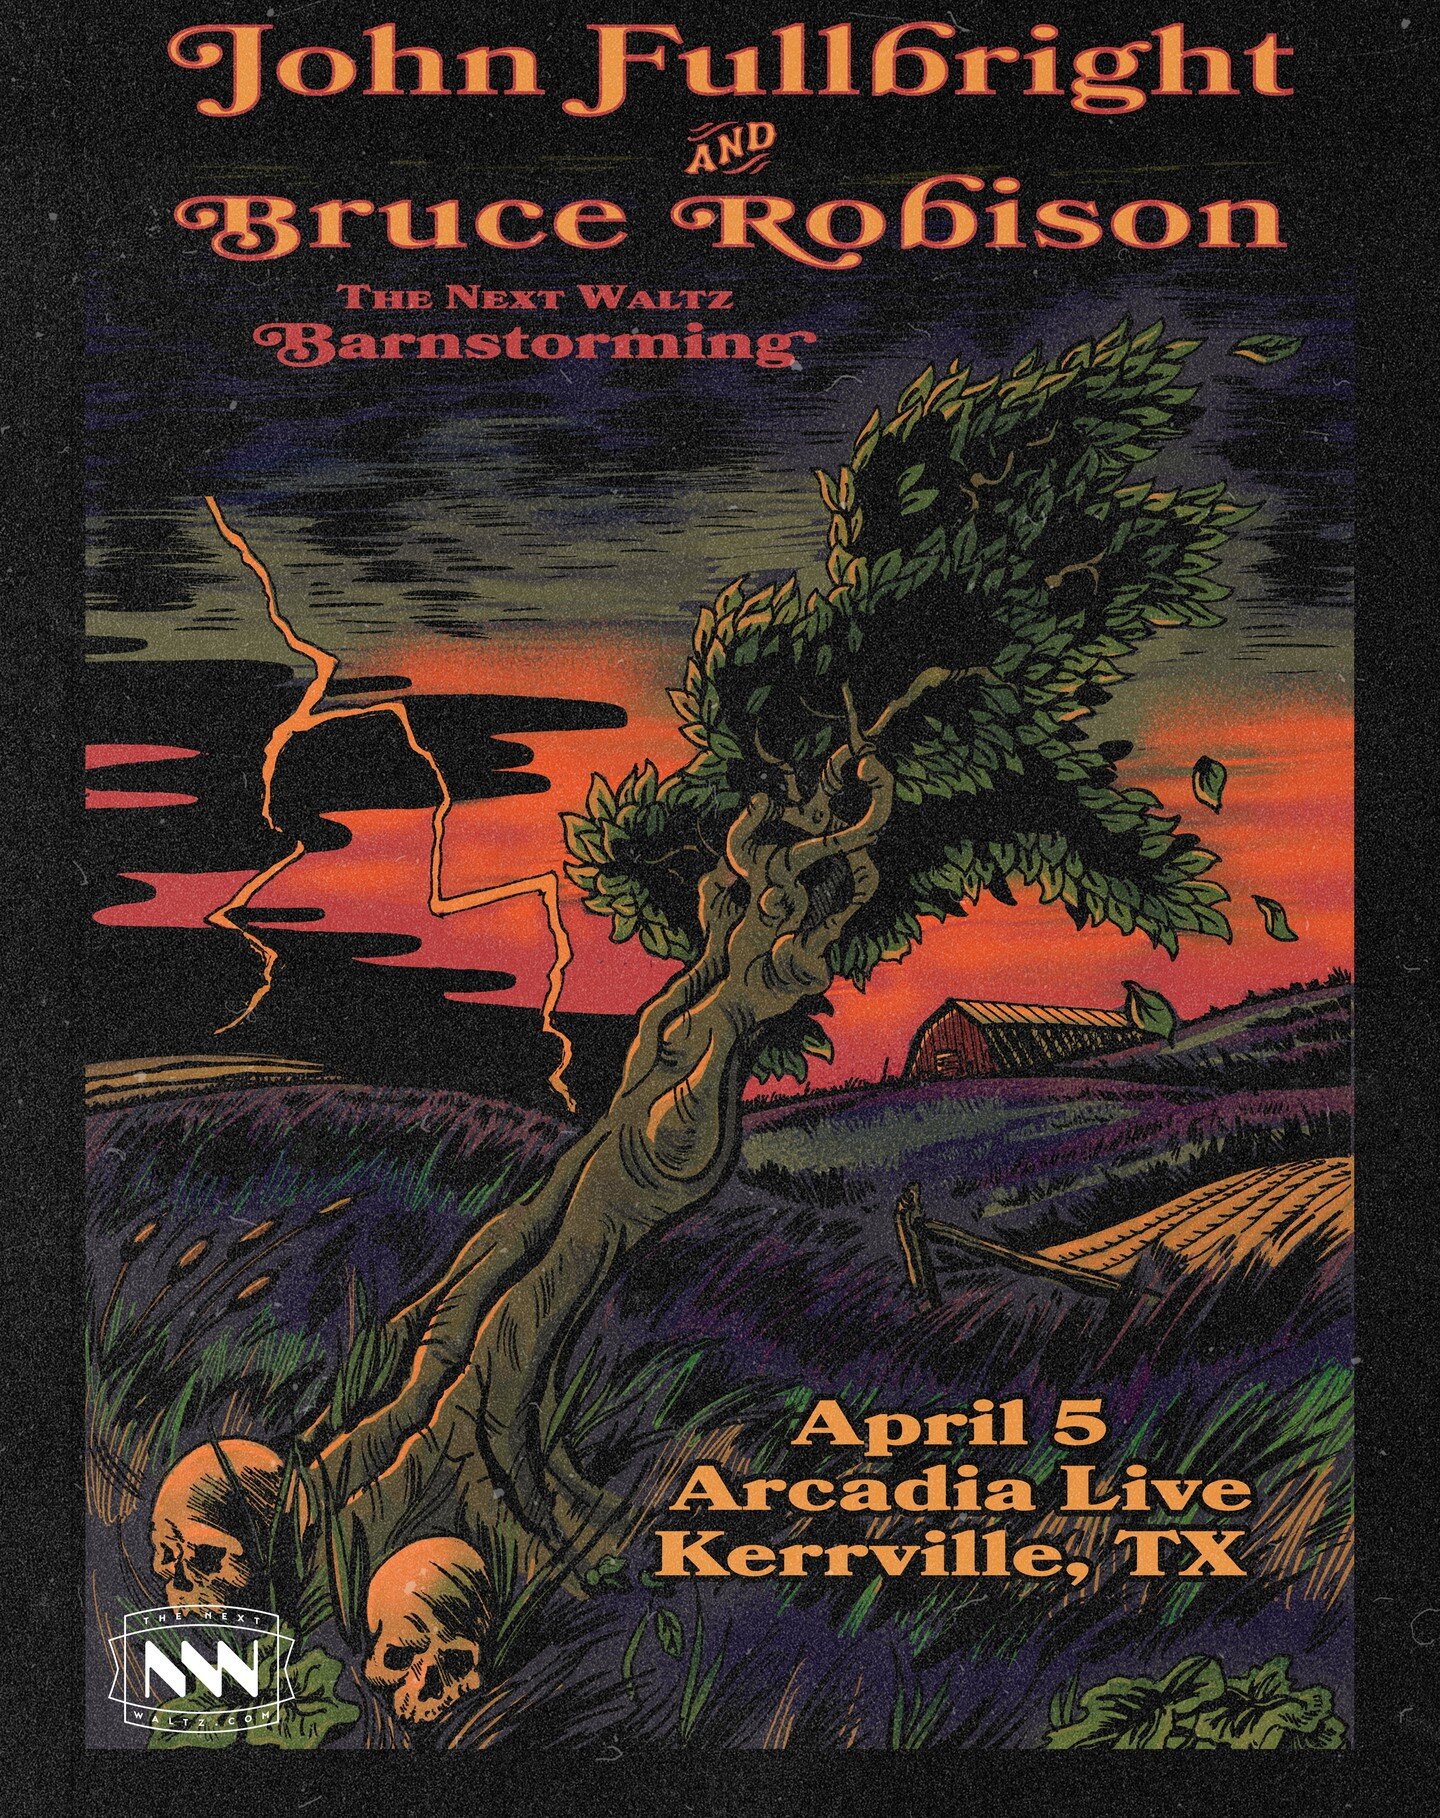 A week away from kicking off The Next Waltz Barnstorming in Kerrville at @arcadialivekerrville and Austin at @paramountaustin with @brucerobison &amp; @fullbright.john ! @tonykamelmusic opens!

Ticket link in bio!